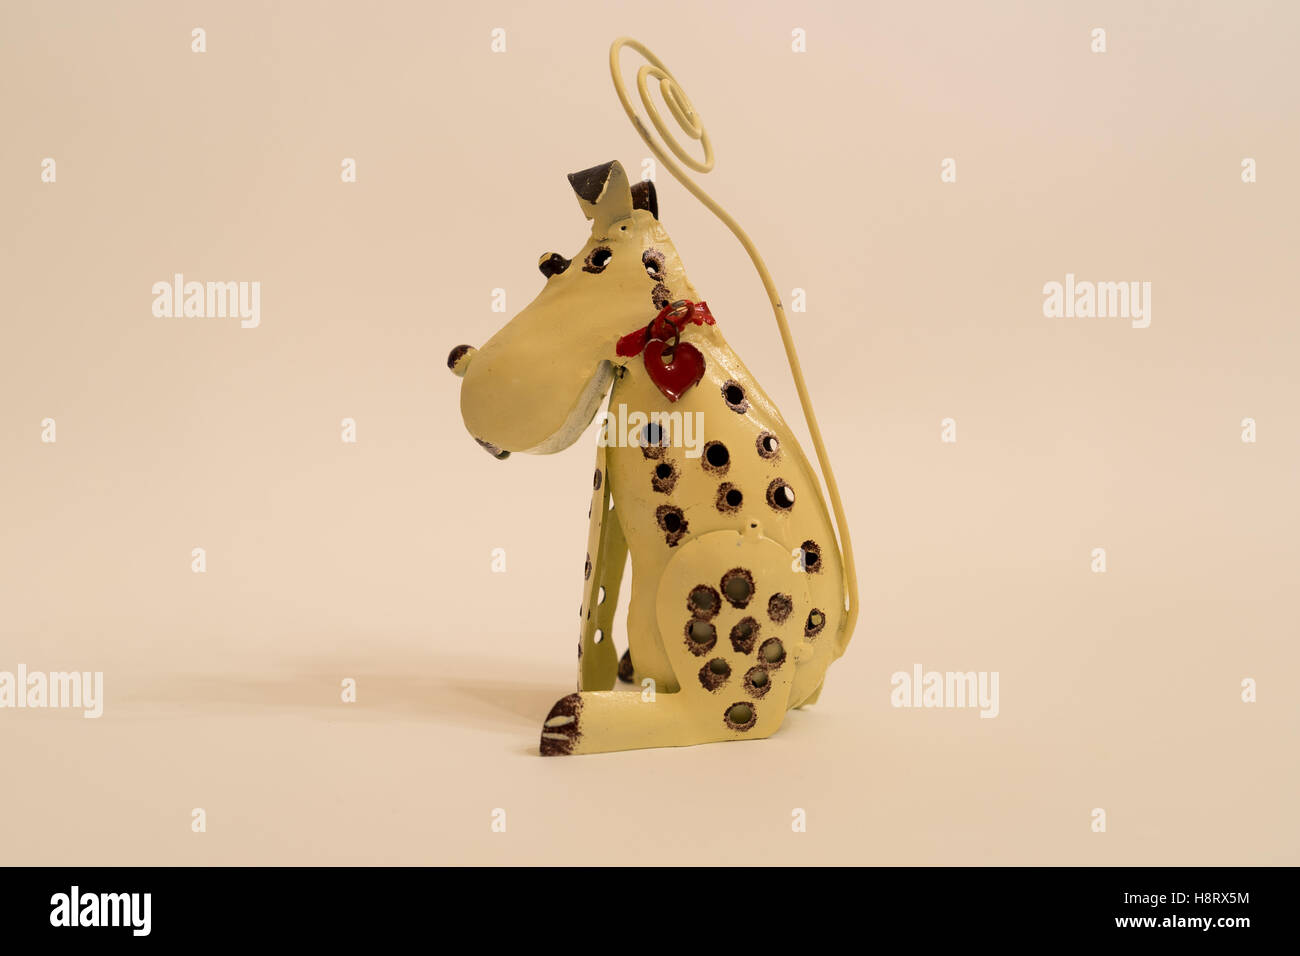 Small metal toy dog with red collar and heart. Stock Photo